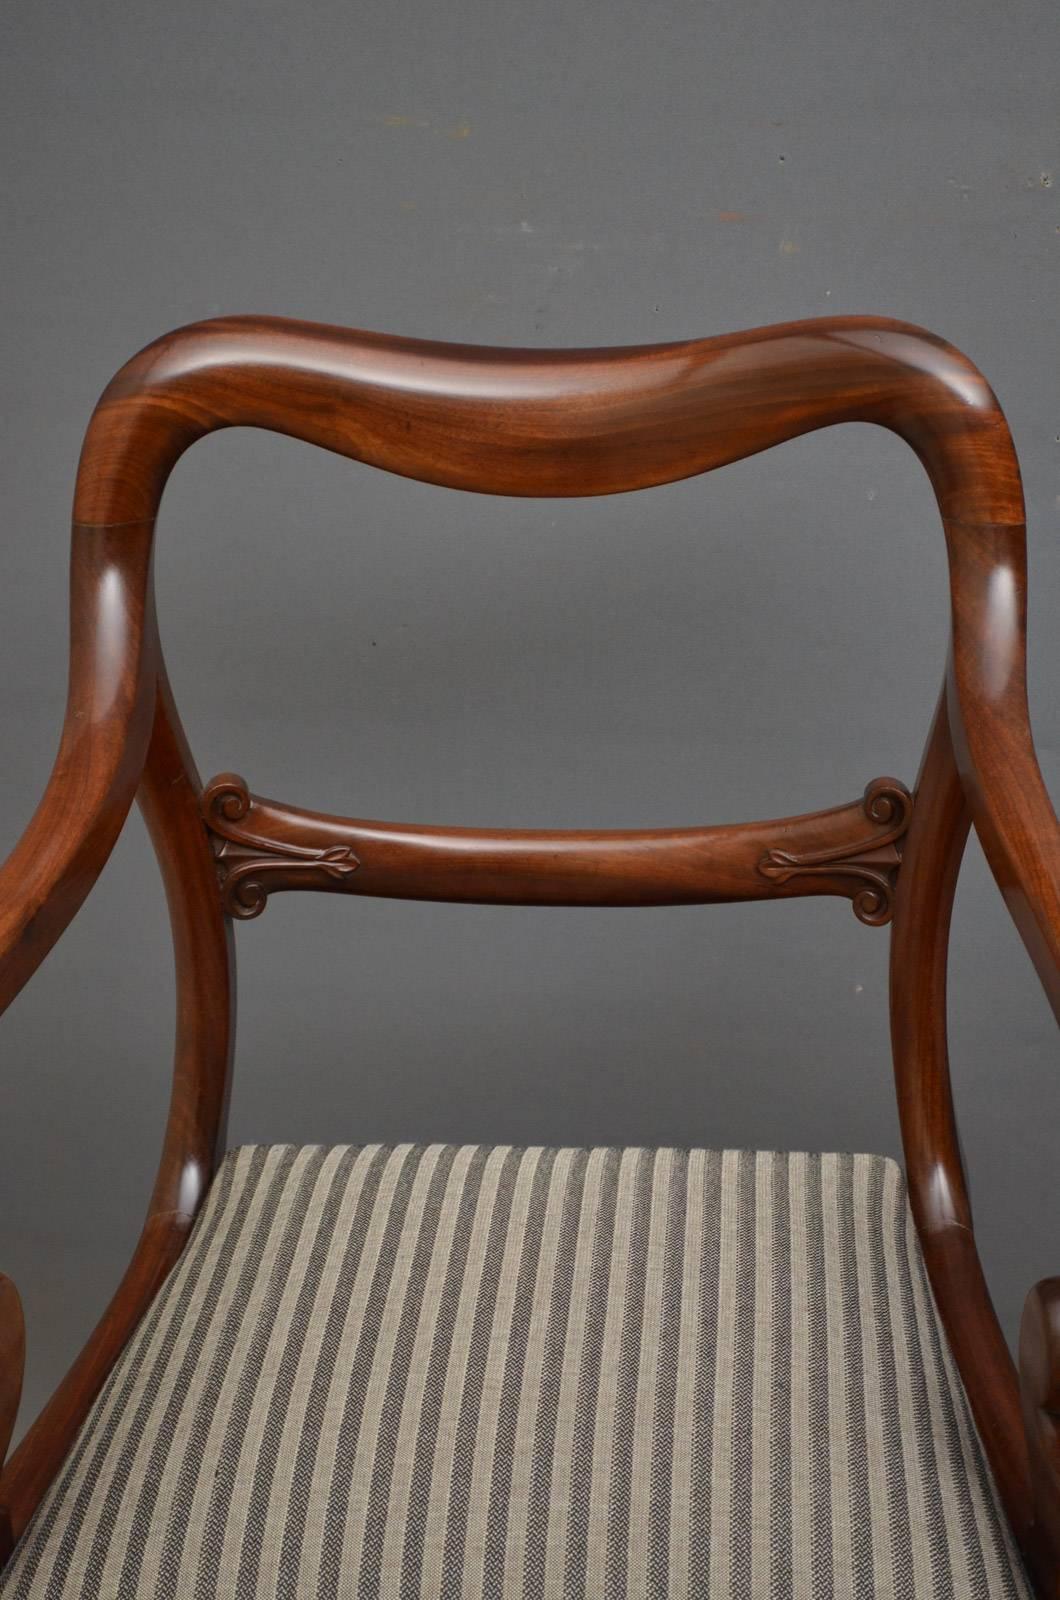 Mid-19th Century Pair of Early Victorian Mahogany Balloonback Carver Chairs